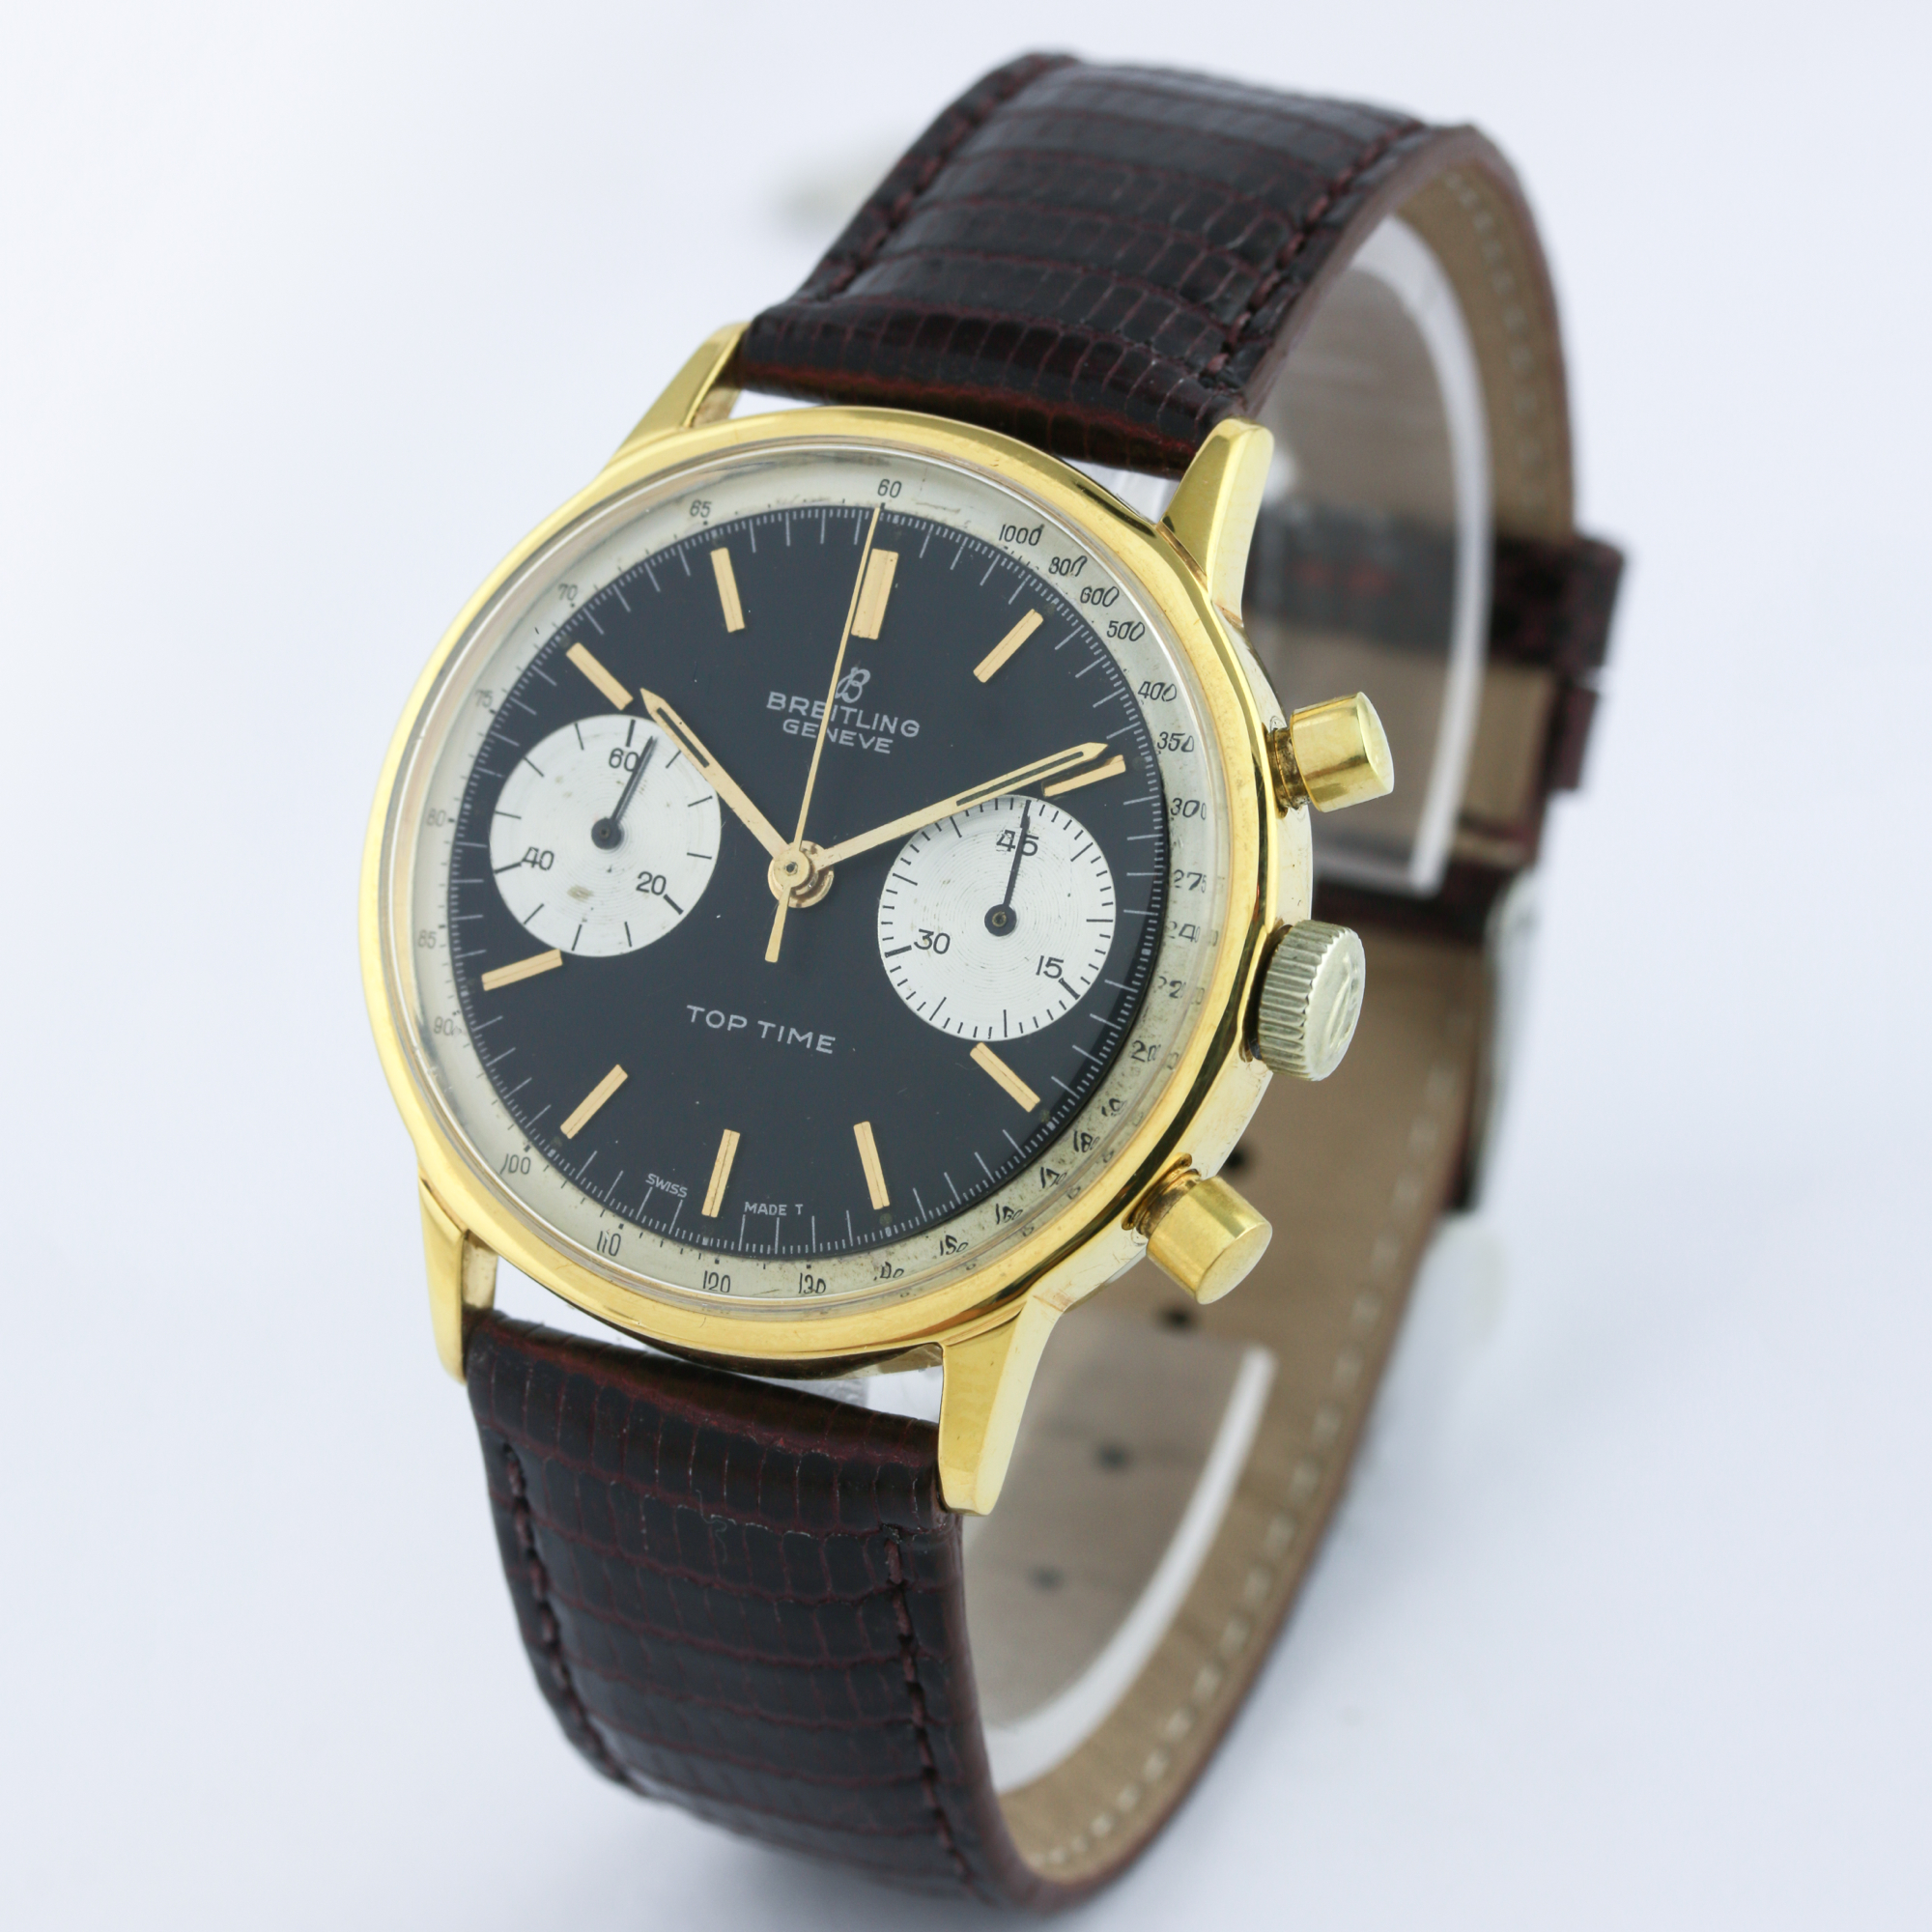 A GENTLEMAN'S GOLD PLATED BREITLING TOP TIME CHRONOGRAPH WRIST WATCH CIRCA 1960s, REF. 2000 D: Black - Image 3 of 7